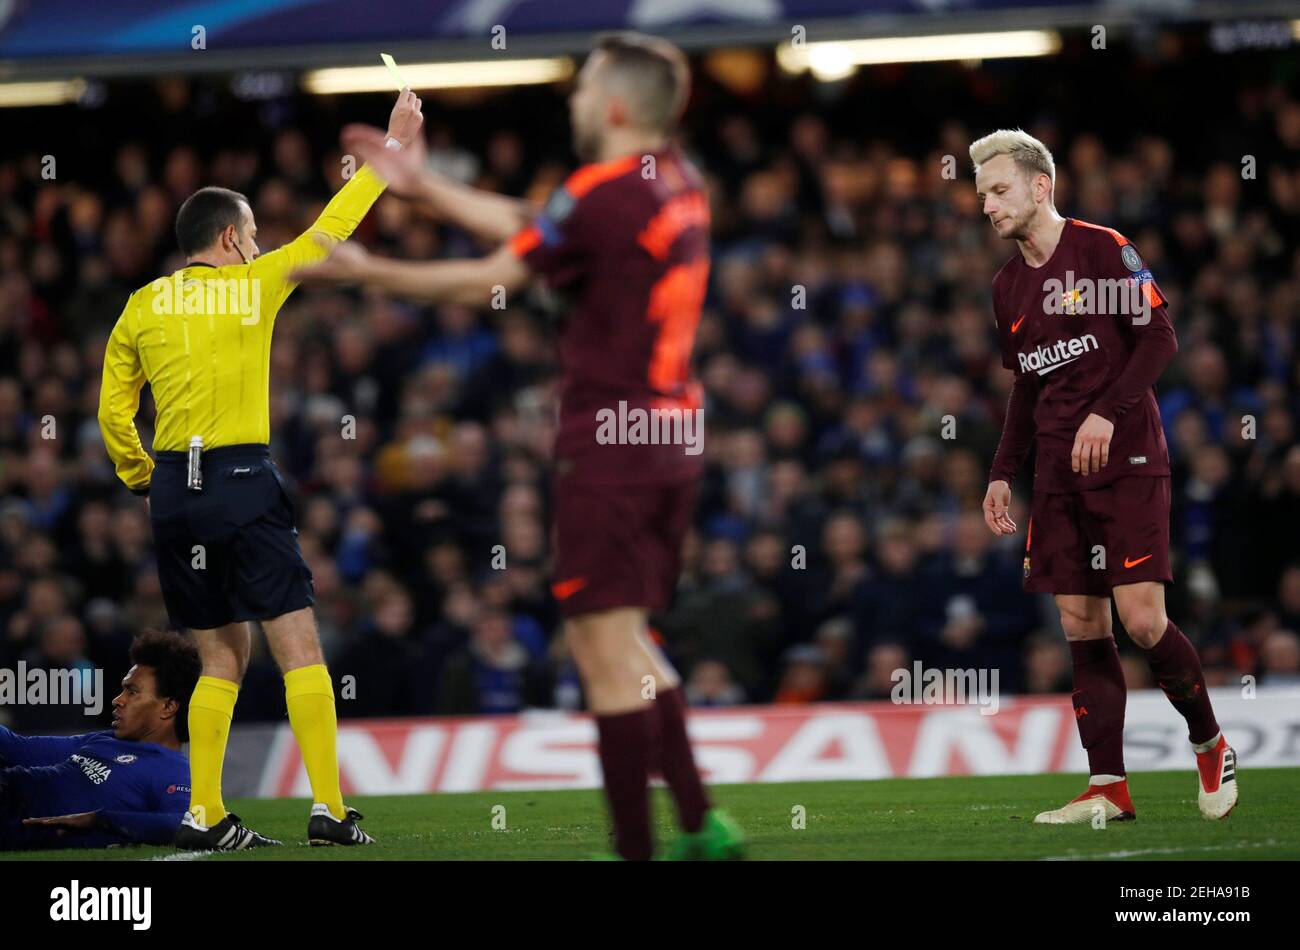 Soccer Football - Champions League Round of 16 First Leg - Chelsea vs FC Barcelona - Stamford Bridge, London, Britain - February 20, 2018   Barcelona’s Ivan Rakitic is shown a yellow card by referee Cuneyt Cakir   REUTERS/Eddie Keogh Stock Photo